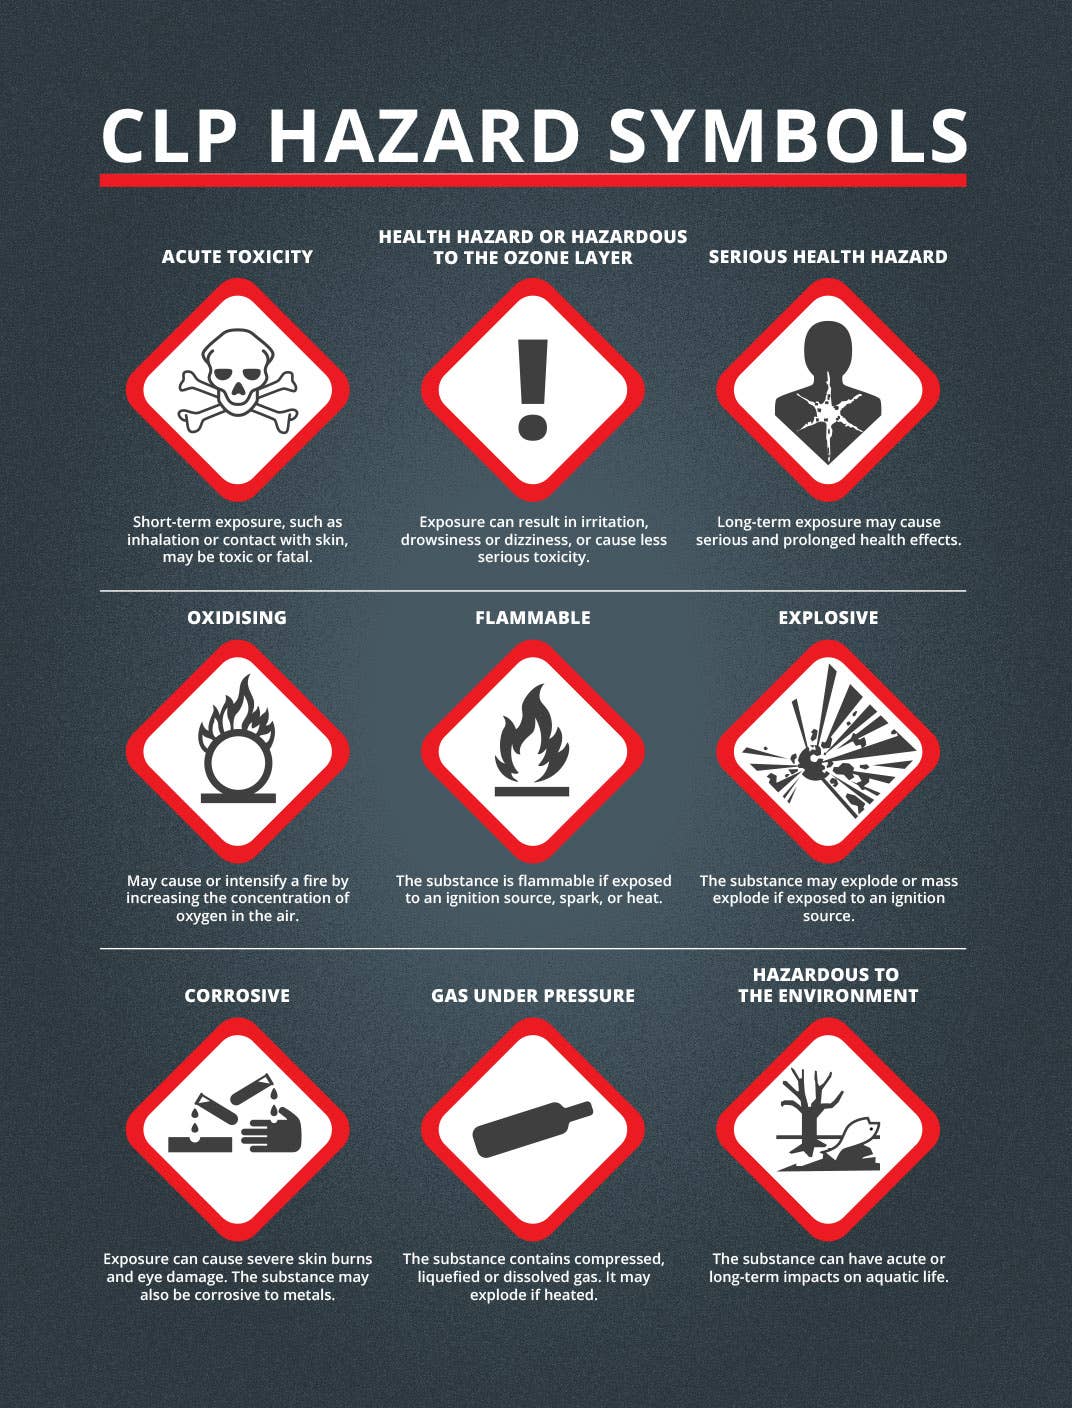 Coshh Hazard Symbols And Meanings - Printable Templates